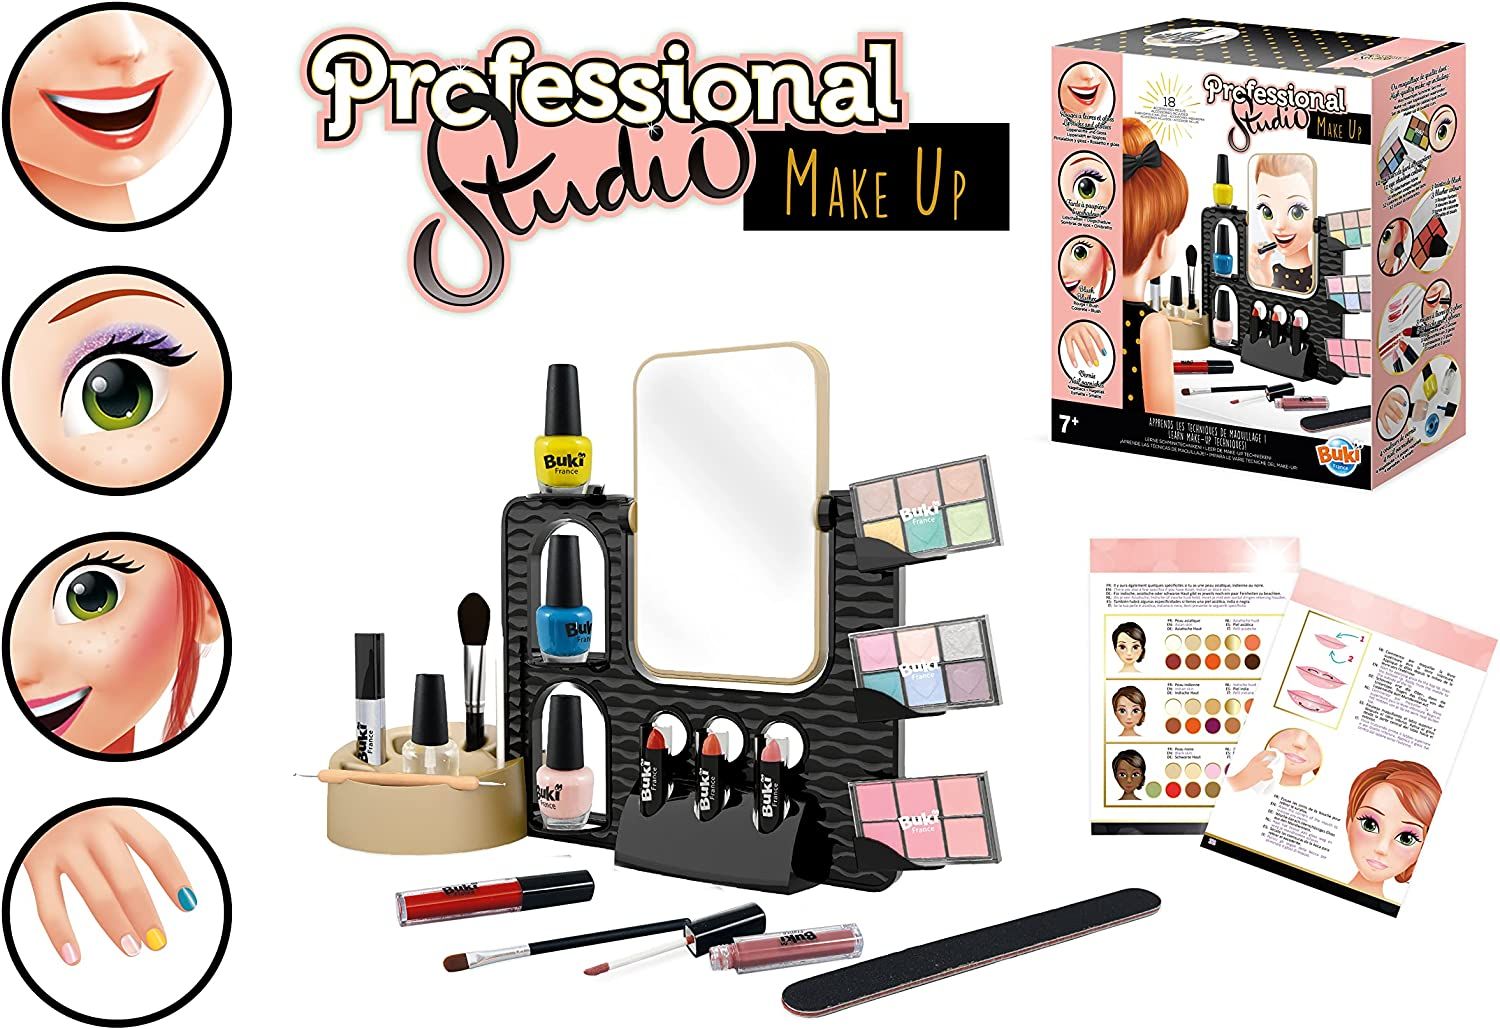 Null Studio - Buki Professional Make up - 5425 - 7 years +-sold new with possibl&hellip;